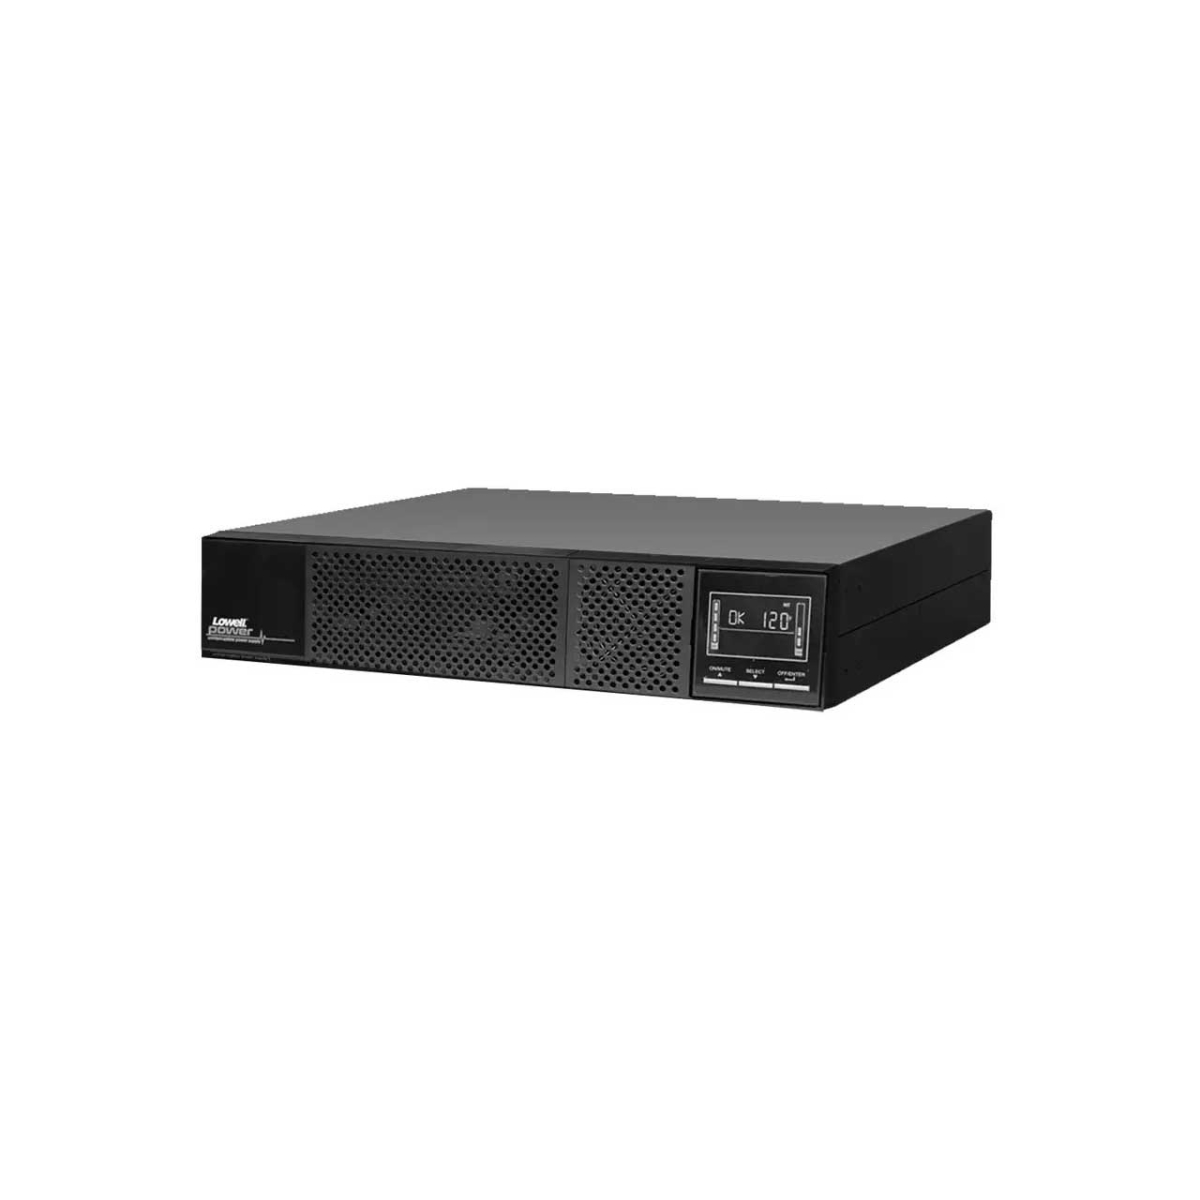 Picture of Lowell Manufacturing LMC-UPS9A-1500IP 1500VA 1450 watt UPS9A-1500-IP Online Power Conditioner - UPS with SNMP Remote Monitoring